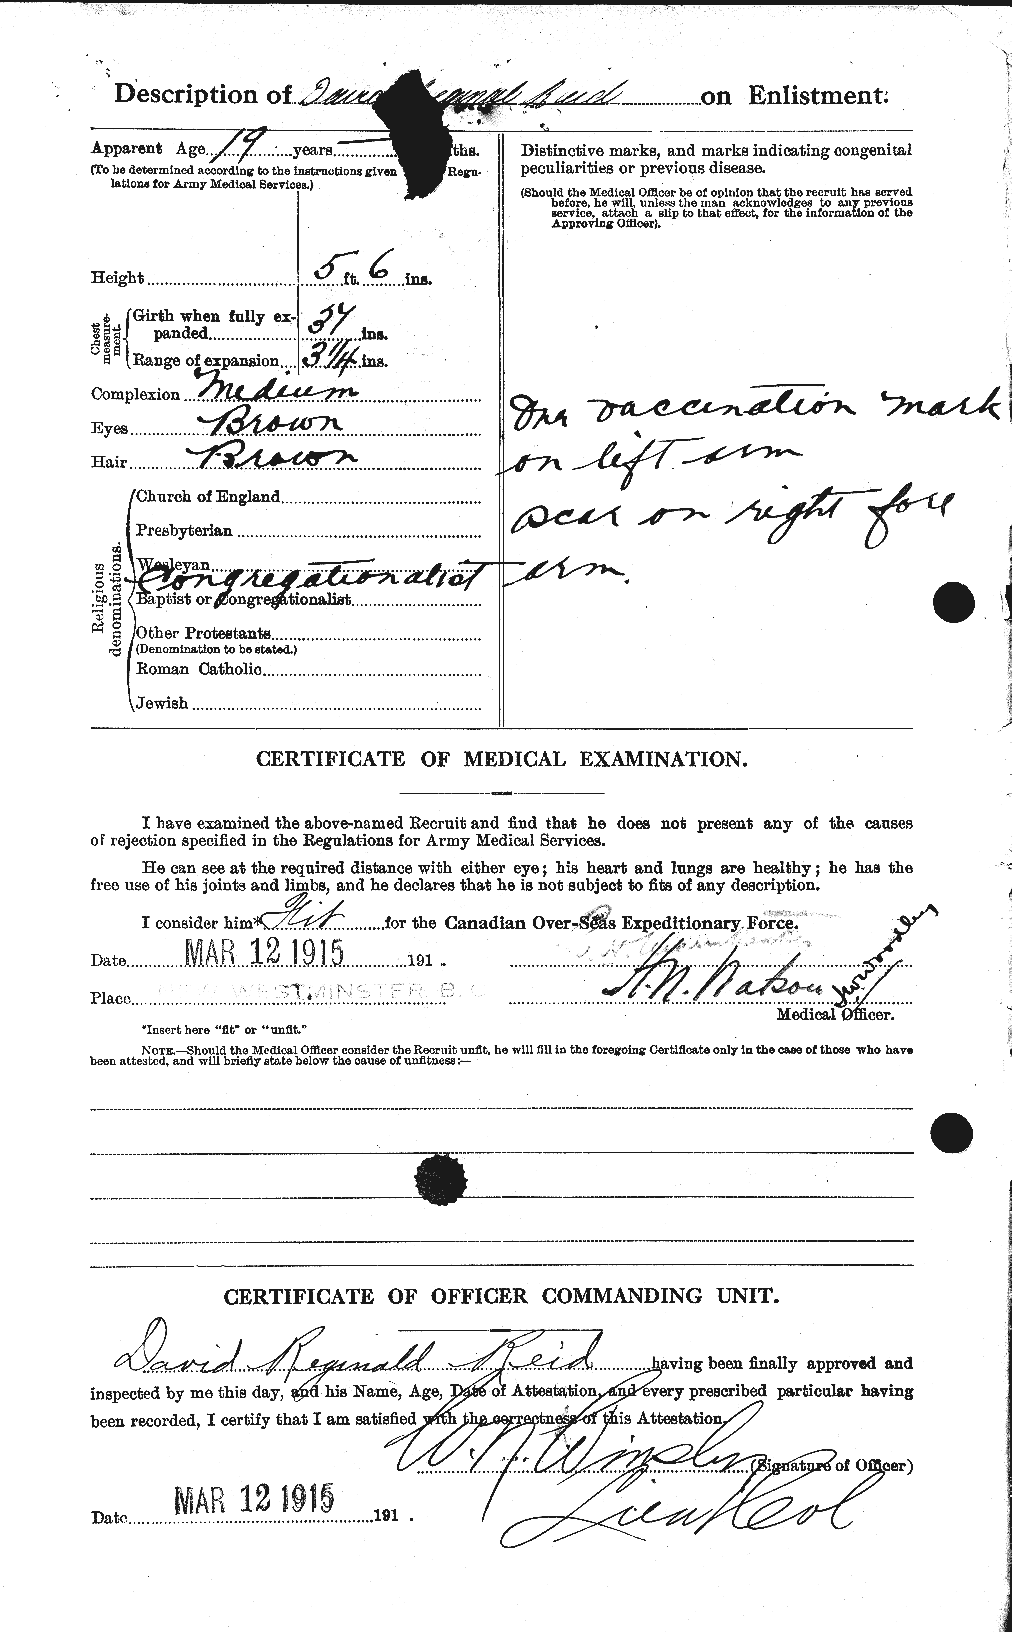 Personnel Records of the First World War - CEF 597946b